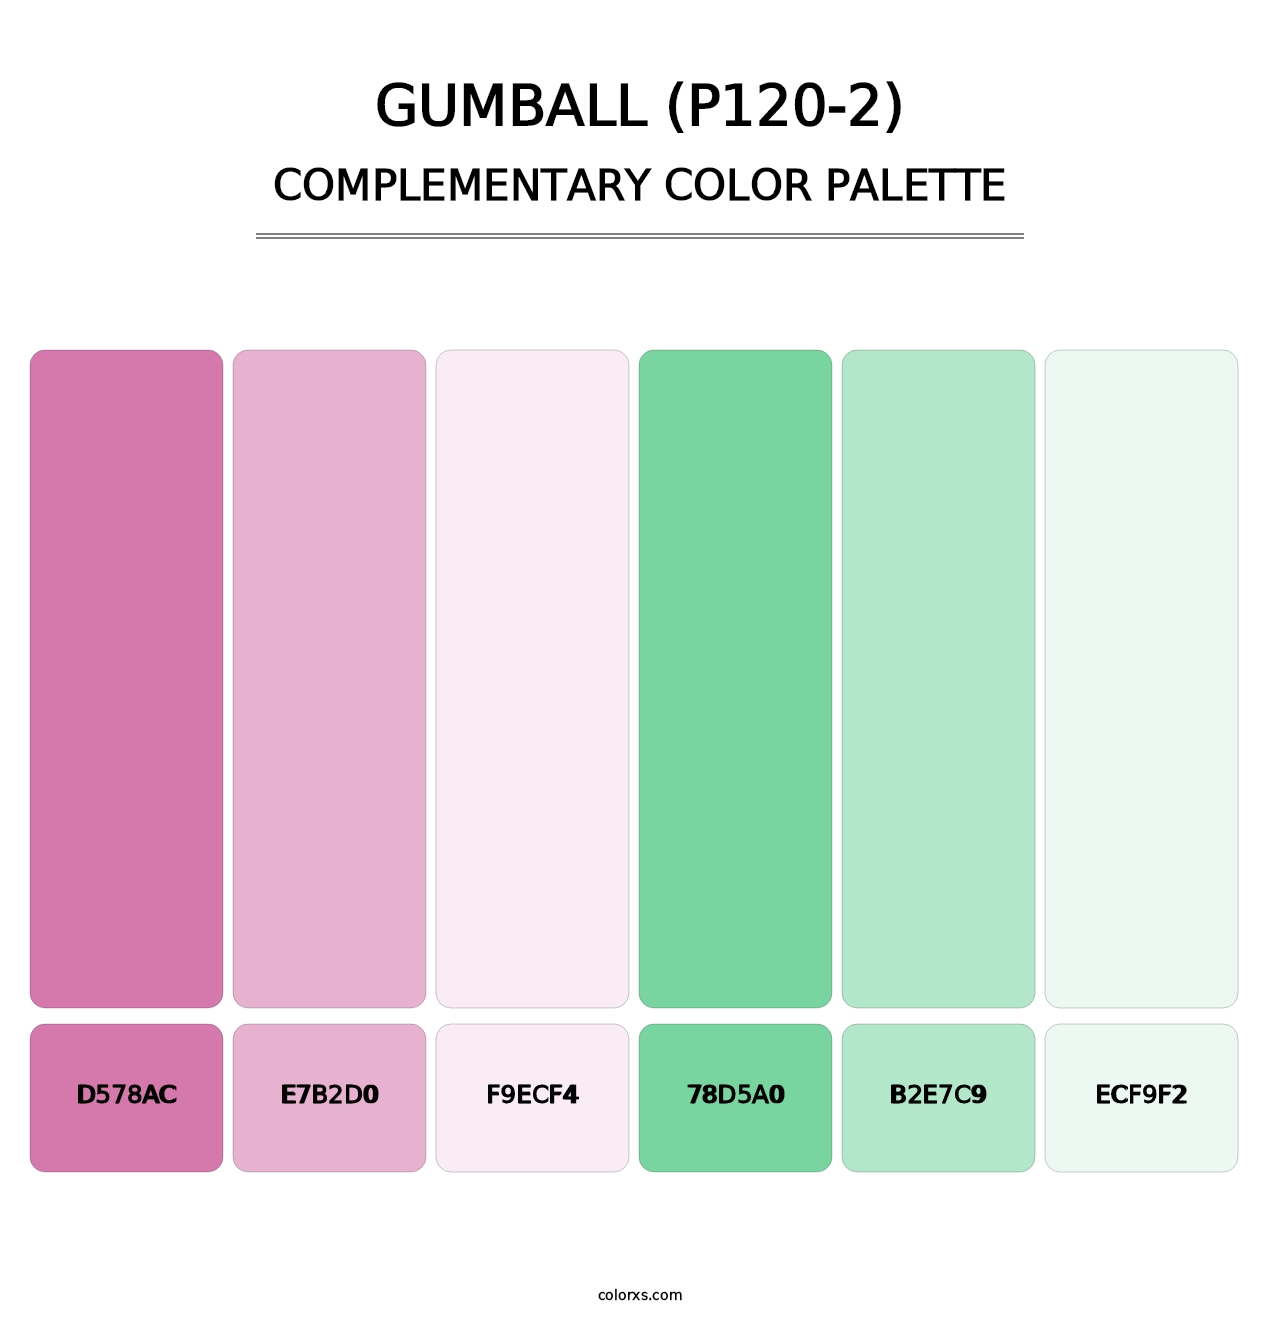 Gumball (P120-2) - Complementary Color Palette